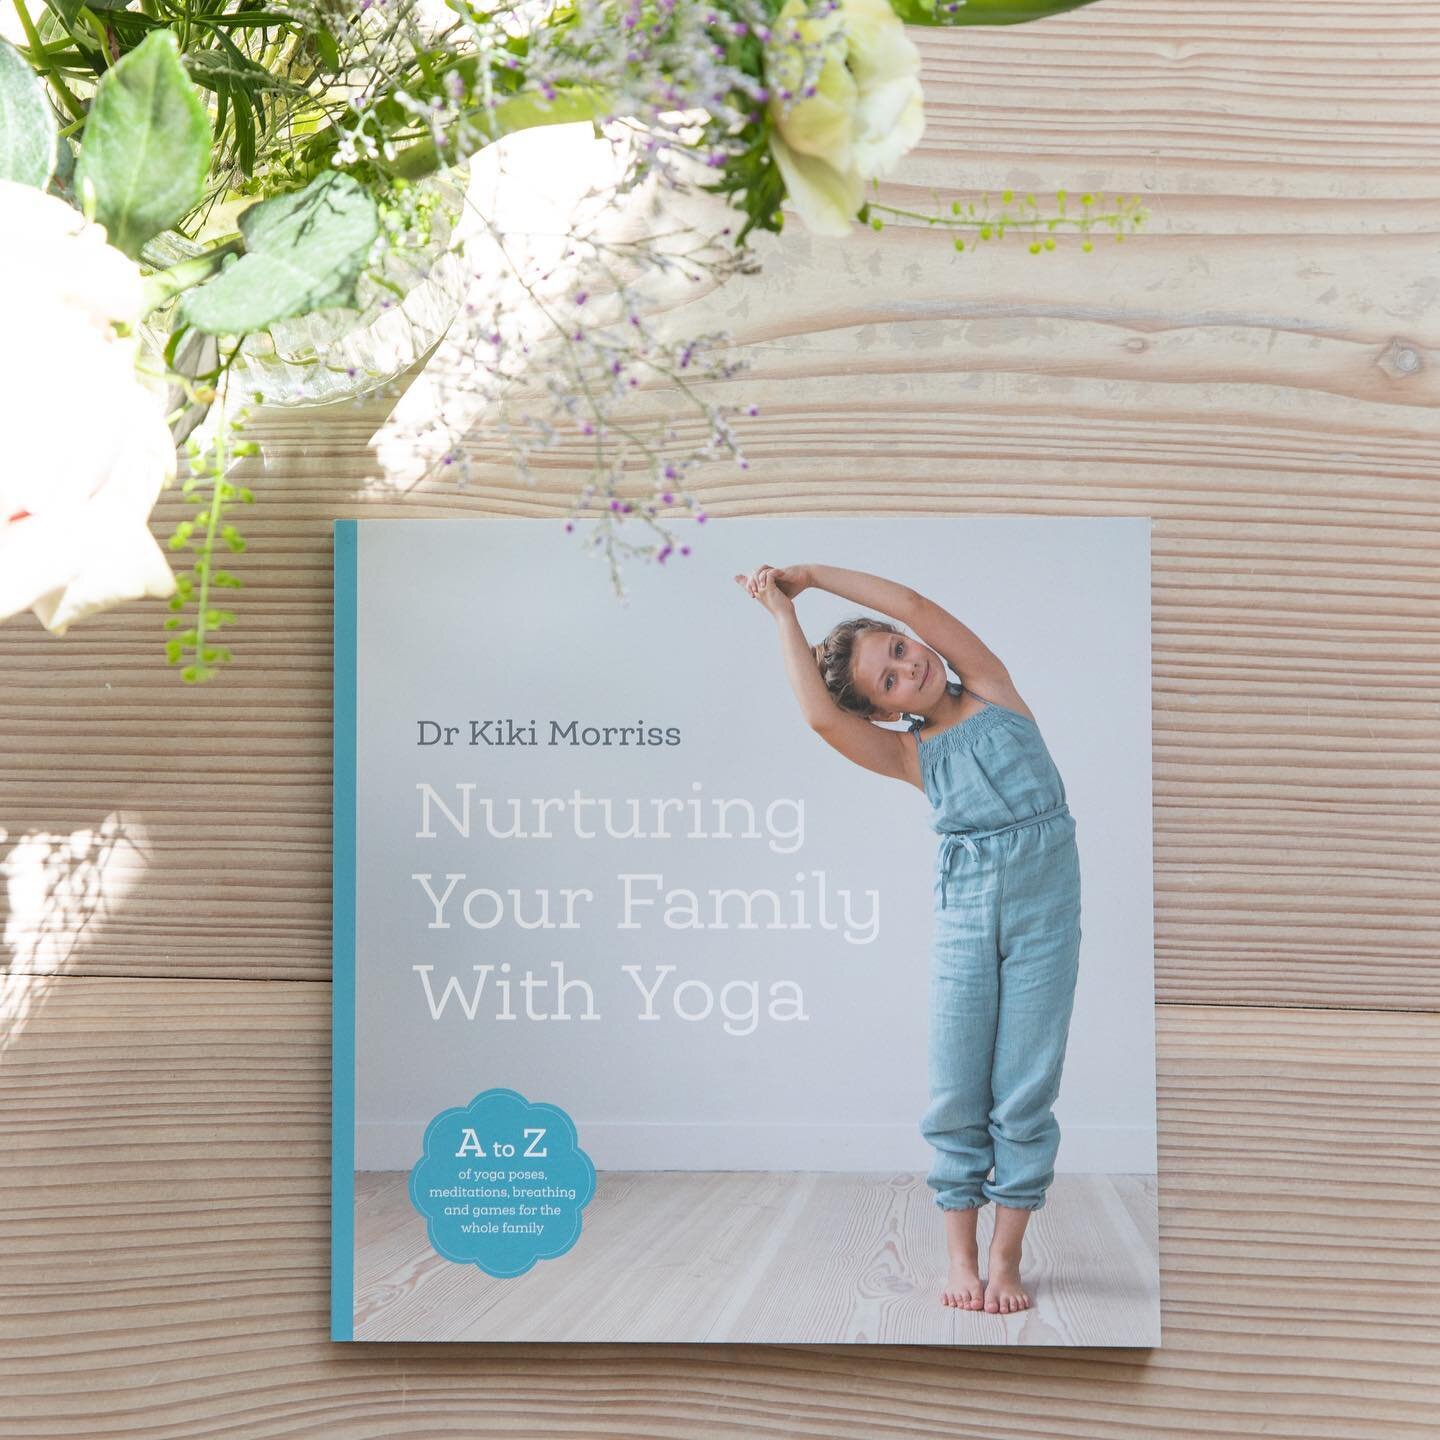 &ldquo;Nurturing Your Family With Yoga&rdquo; is on sale today. 🌱 To win a copy for yourself or a friend, head over to @pramstead_  #nurturingyourfamilywithyoga